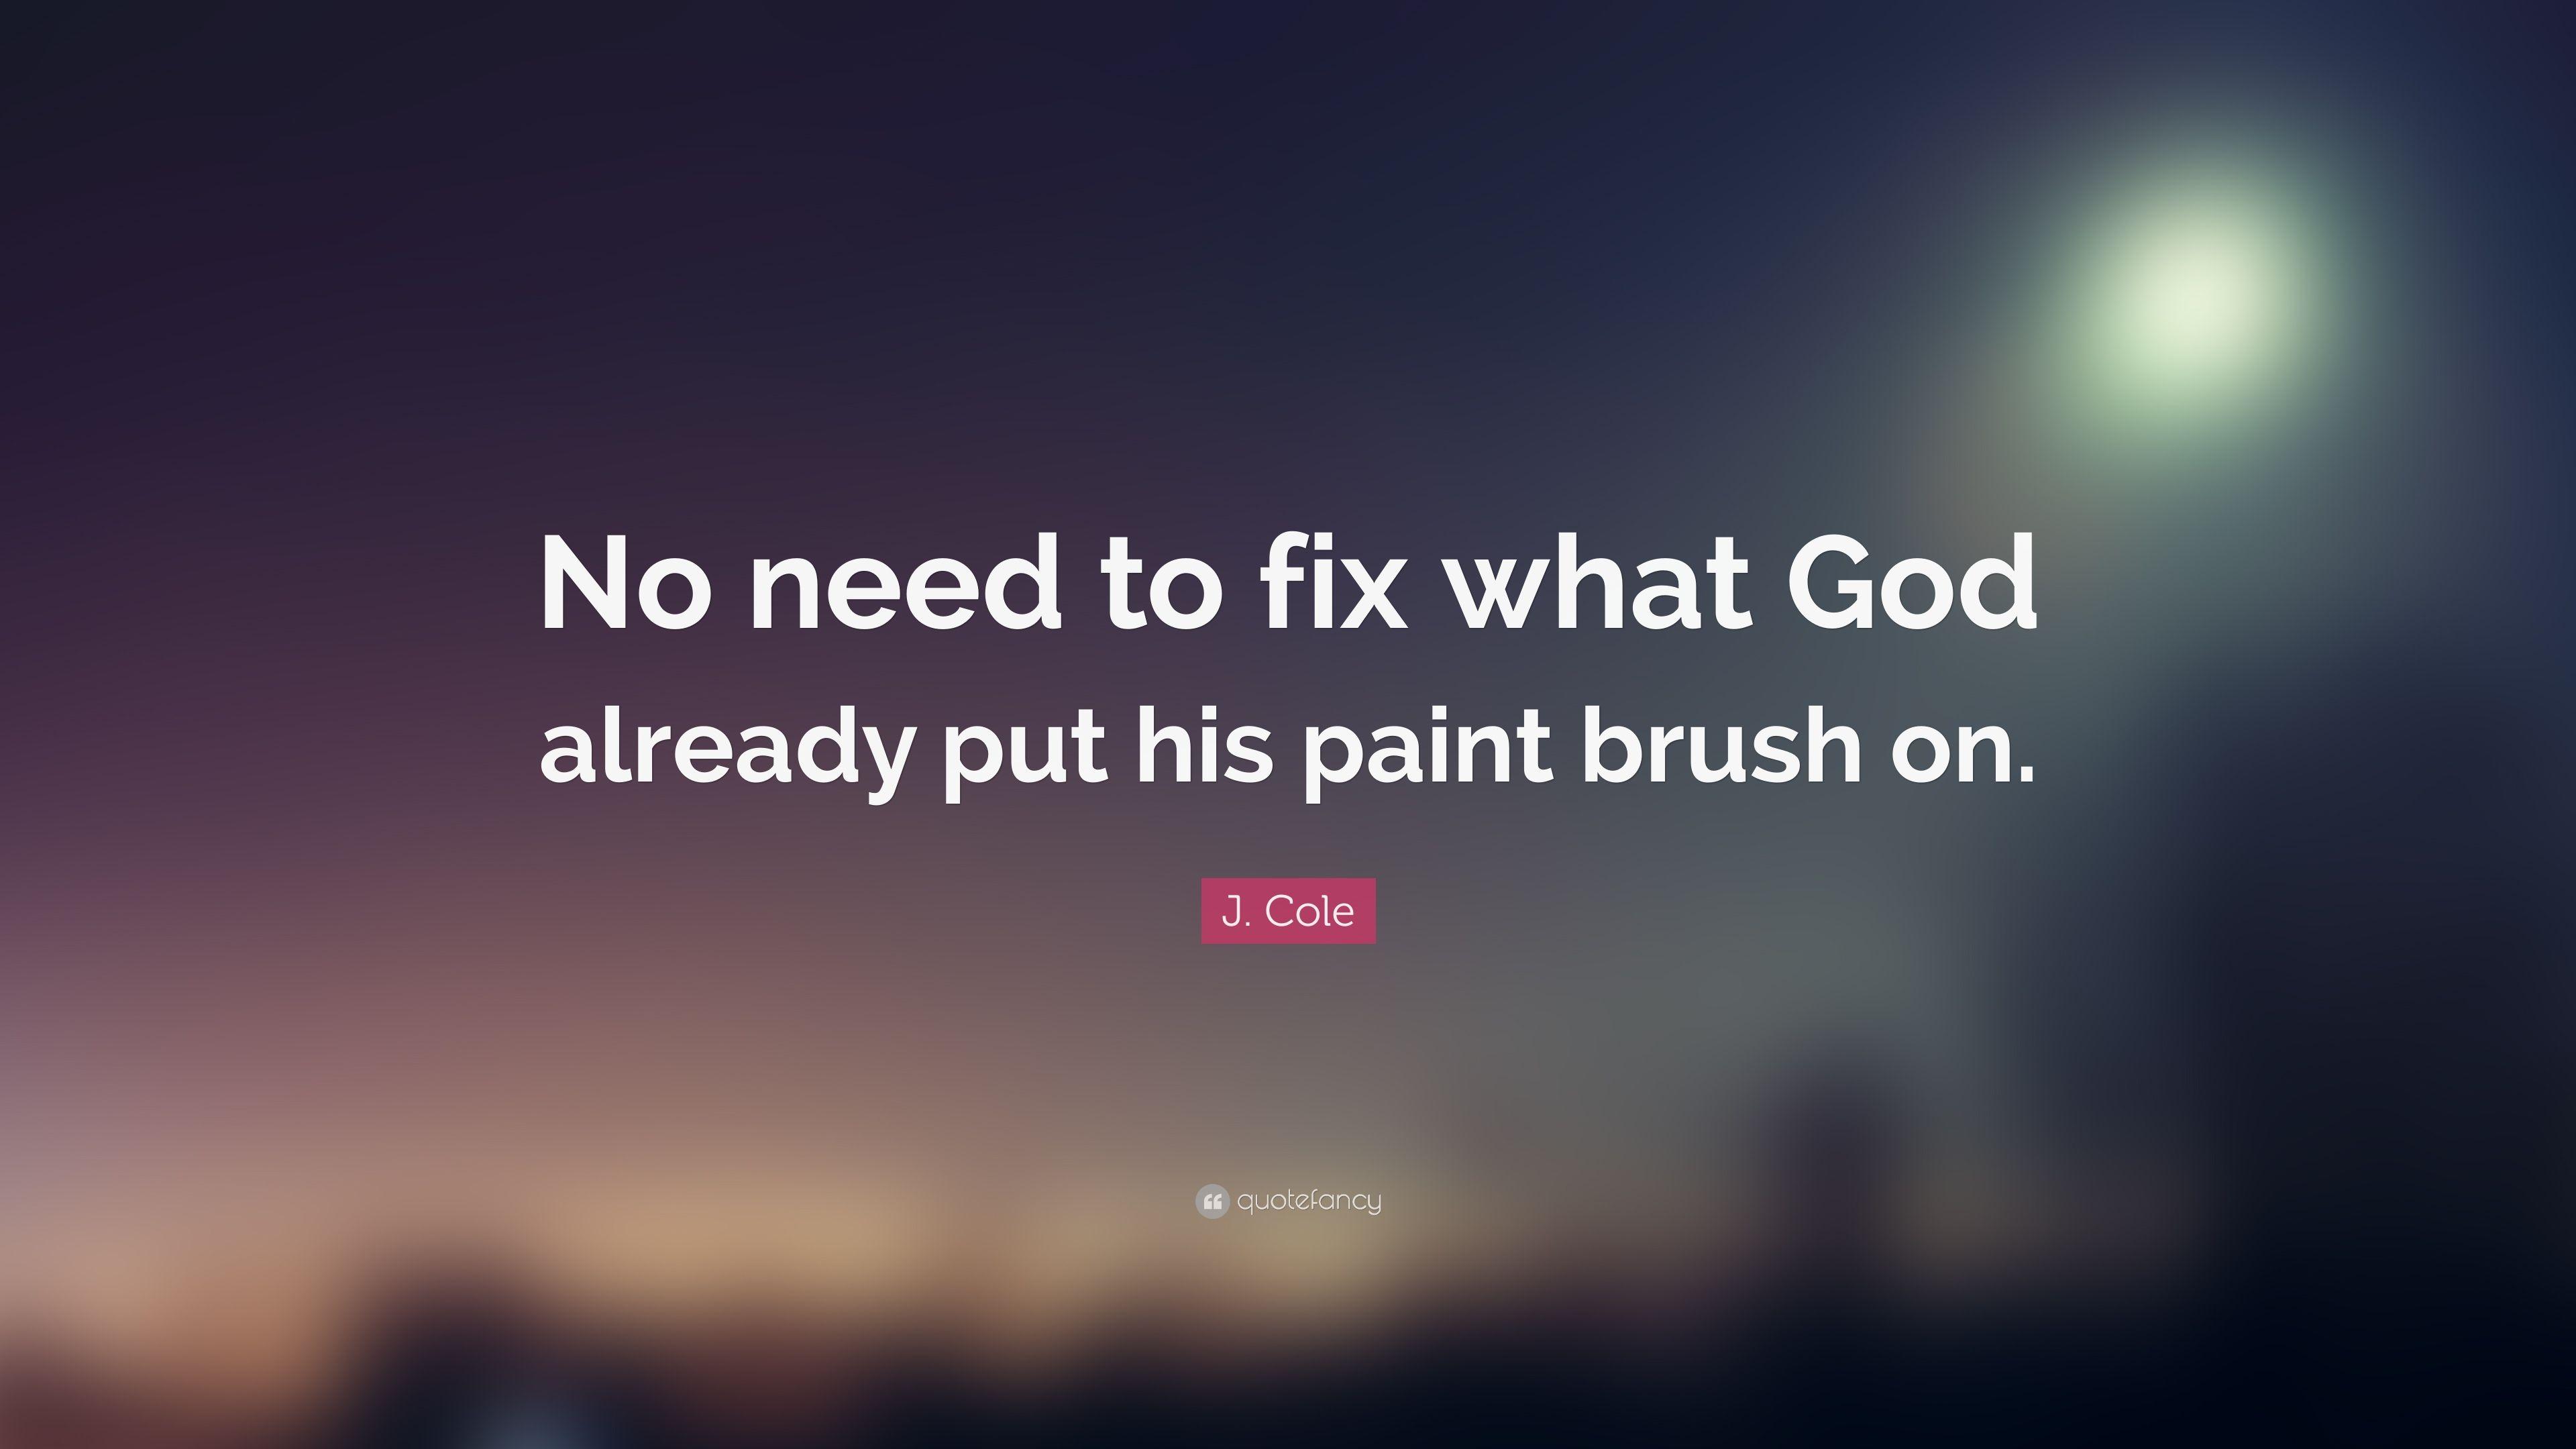 J. Cole Quote: “No need to fix what God already put his